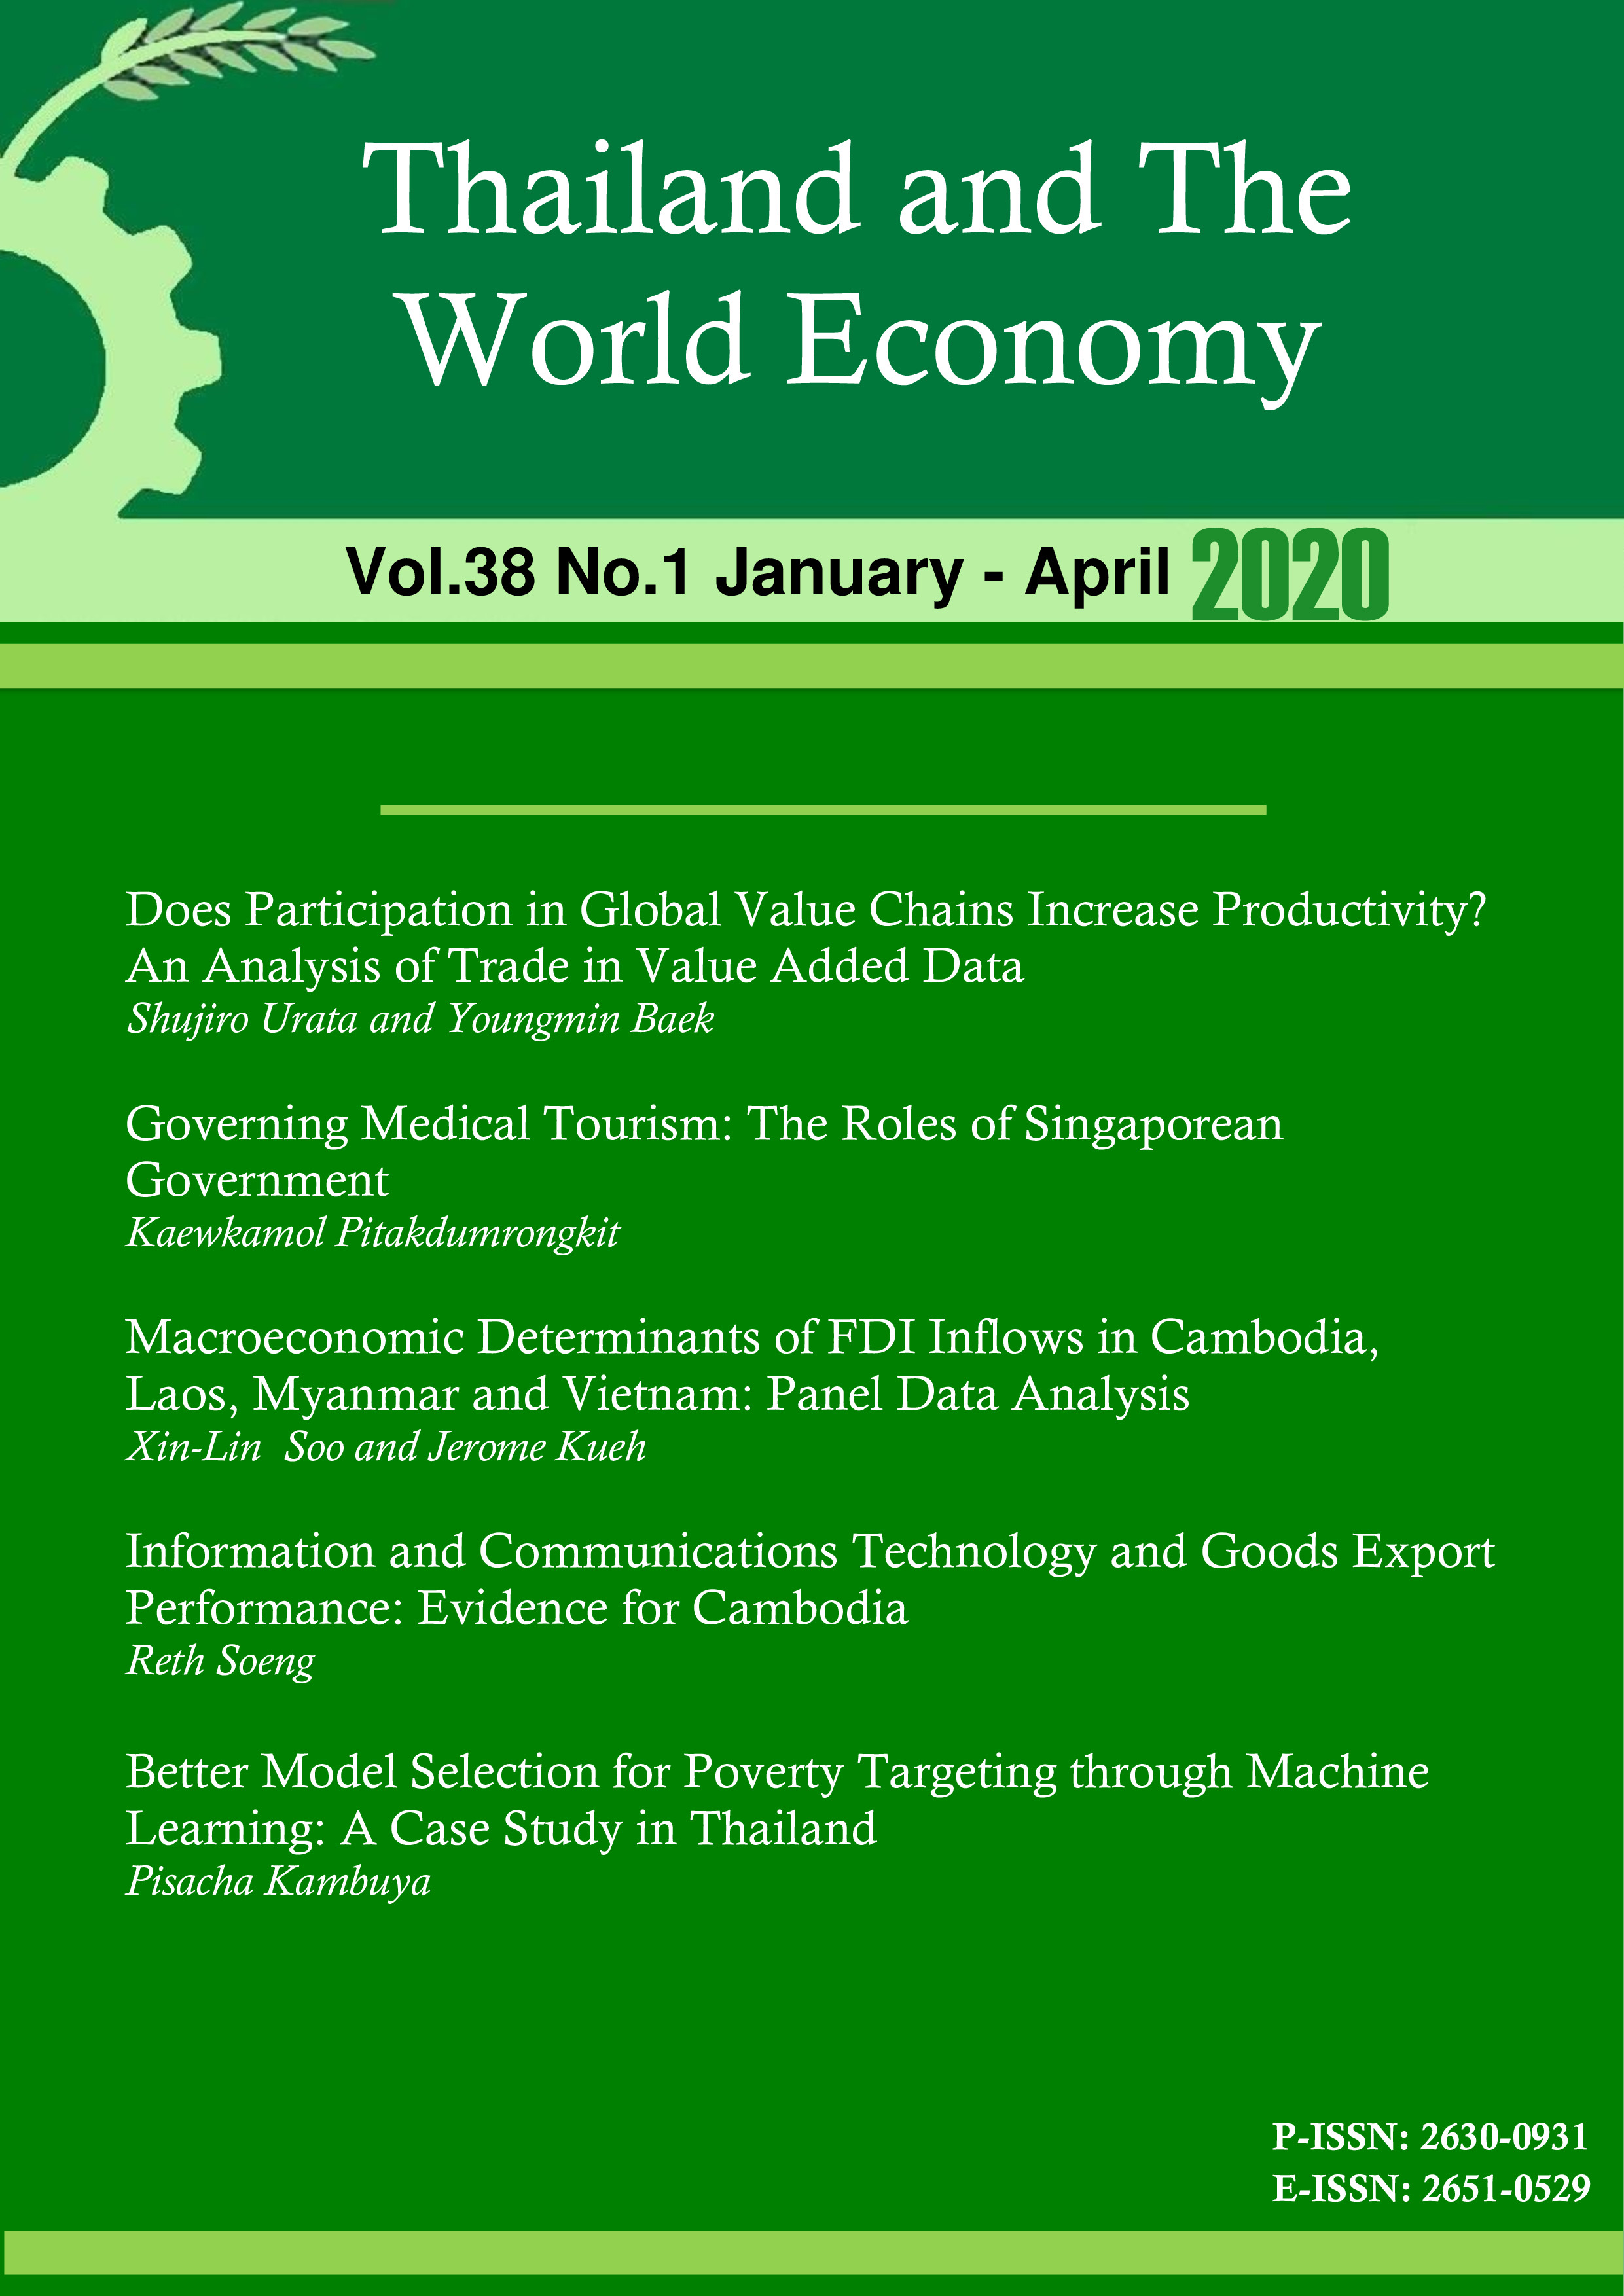 					View Vol. 38 No. 1 (2020): Thailand and The World Economy
				